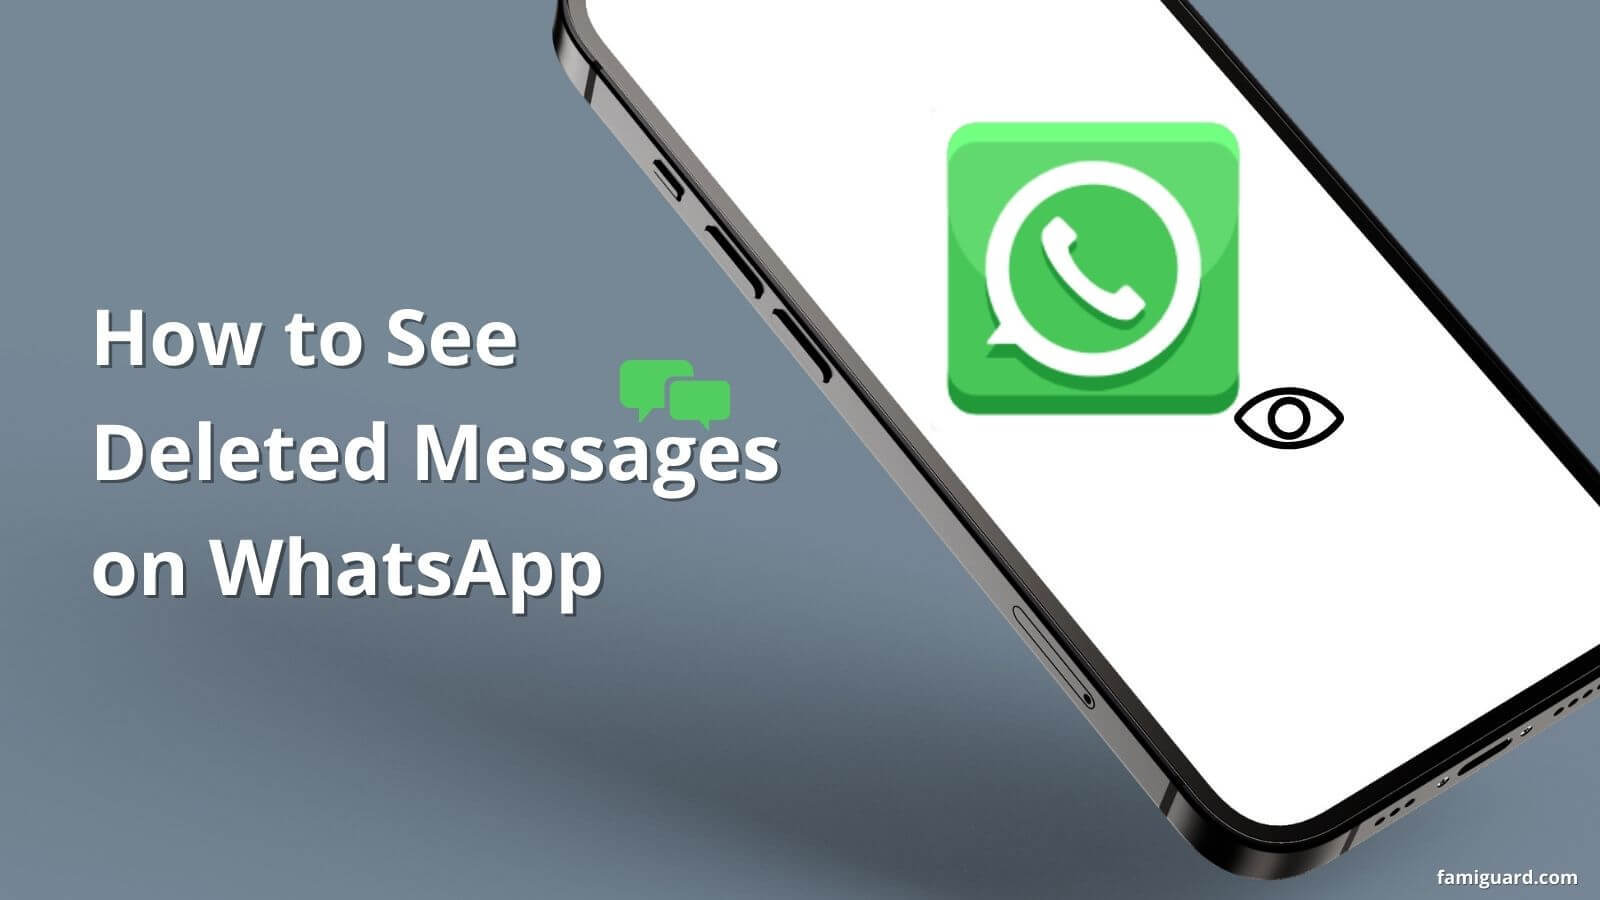 -How to See Deleted WhatsApp Messages